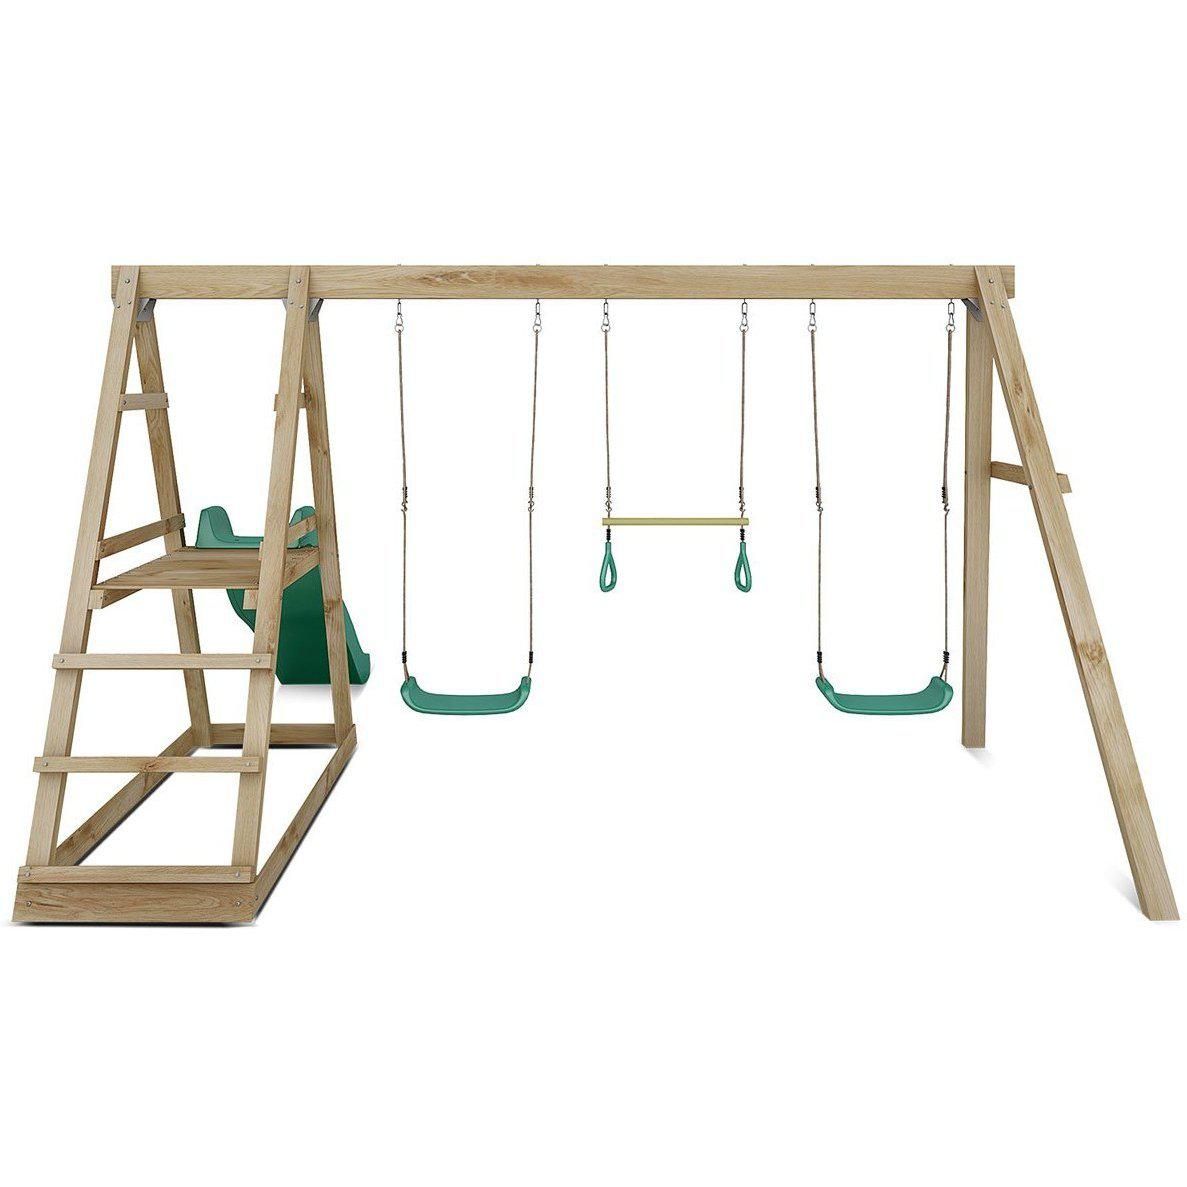 Buy Now Pay Later Buy Winston 4 Station Timber Swing Set with Slide Australia 